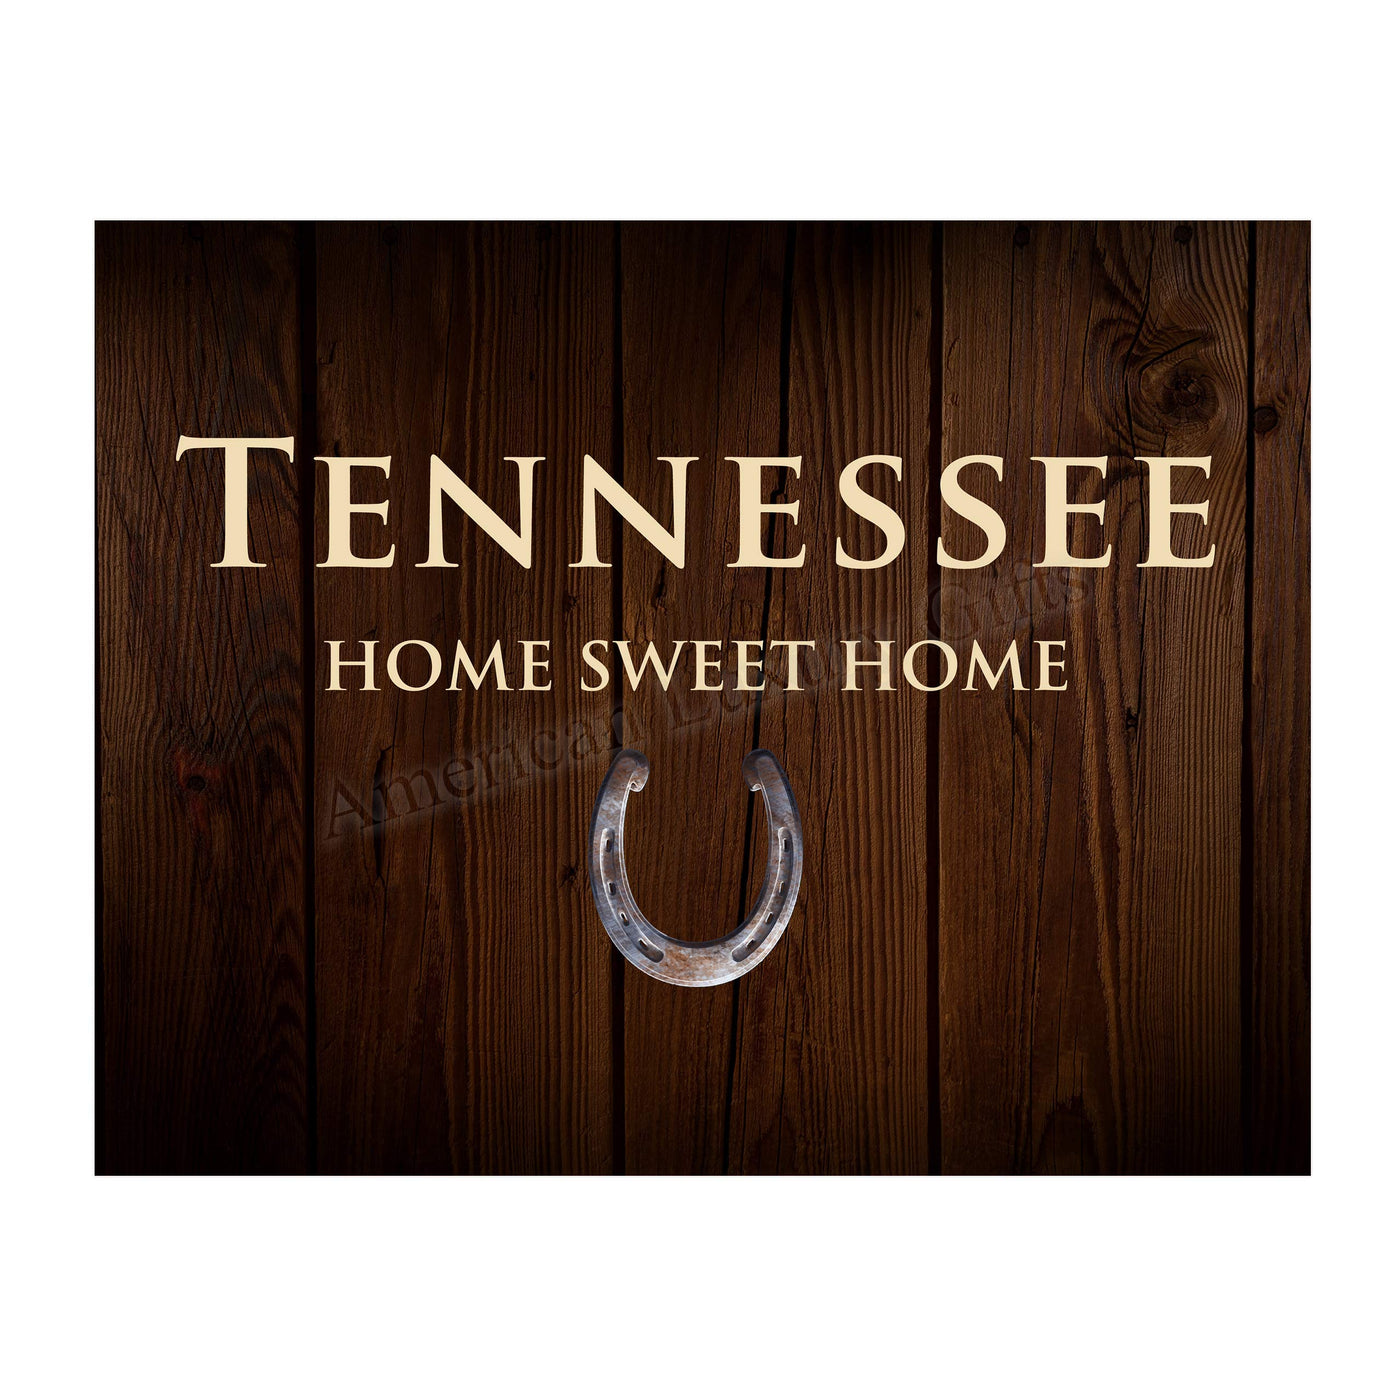 Tennessee-Home Sweet Home State Wall Decor -10 x 8" Country Rustic Family Art Print-Ready to Frame. Home-Office-Welcome-Farmhouse Decor. Perfect Southern Housewarming Gift! Printed on Photo Paper.